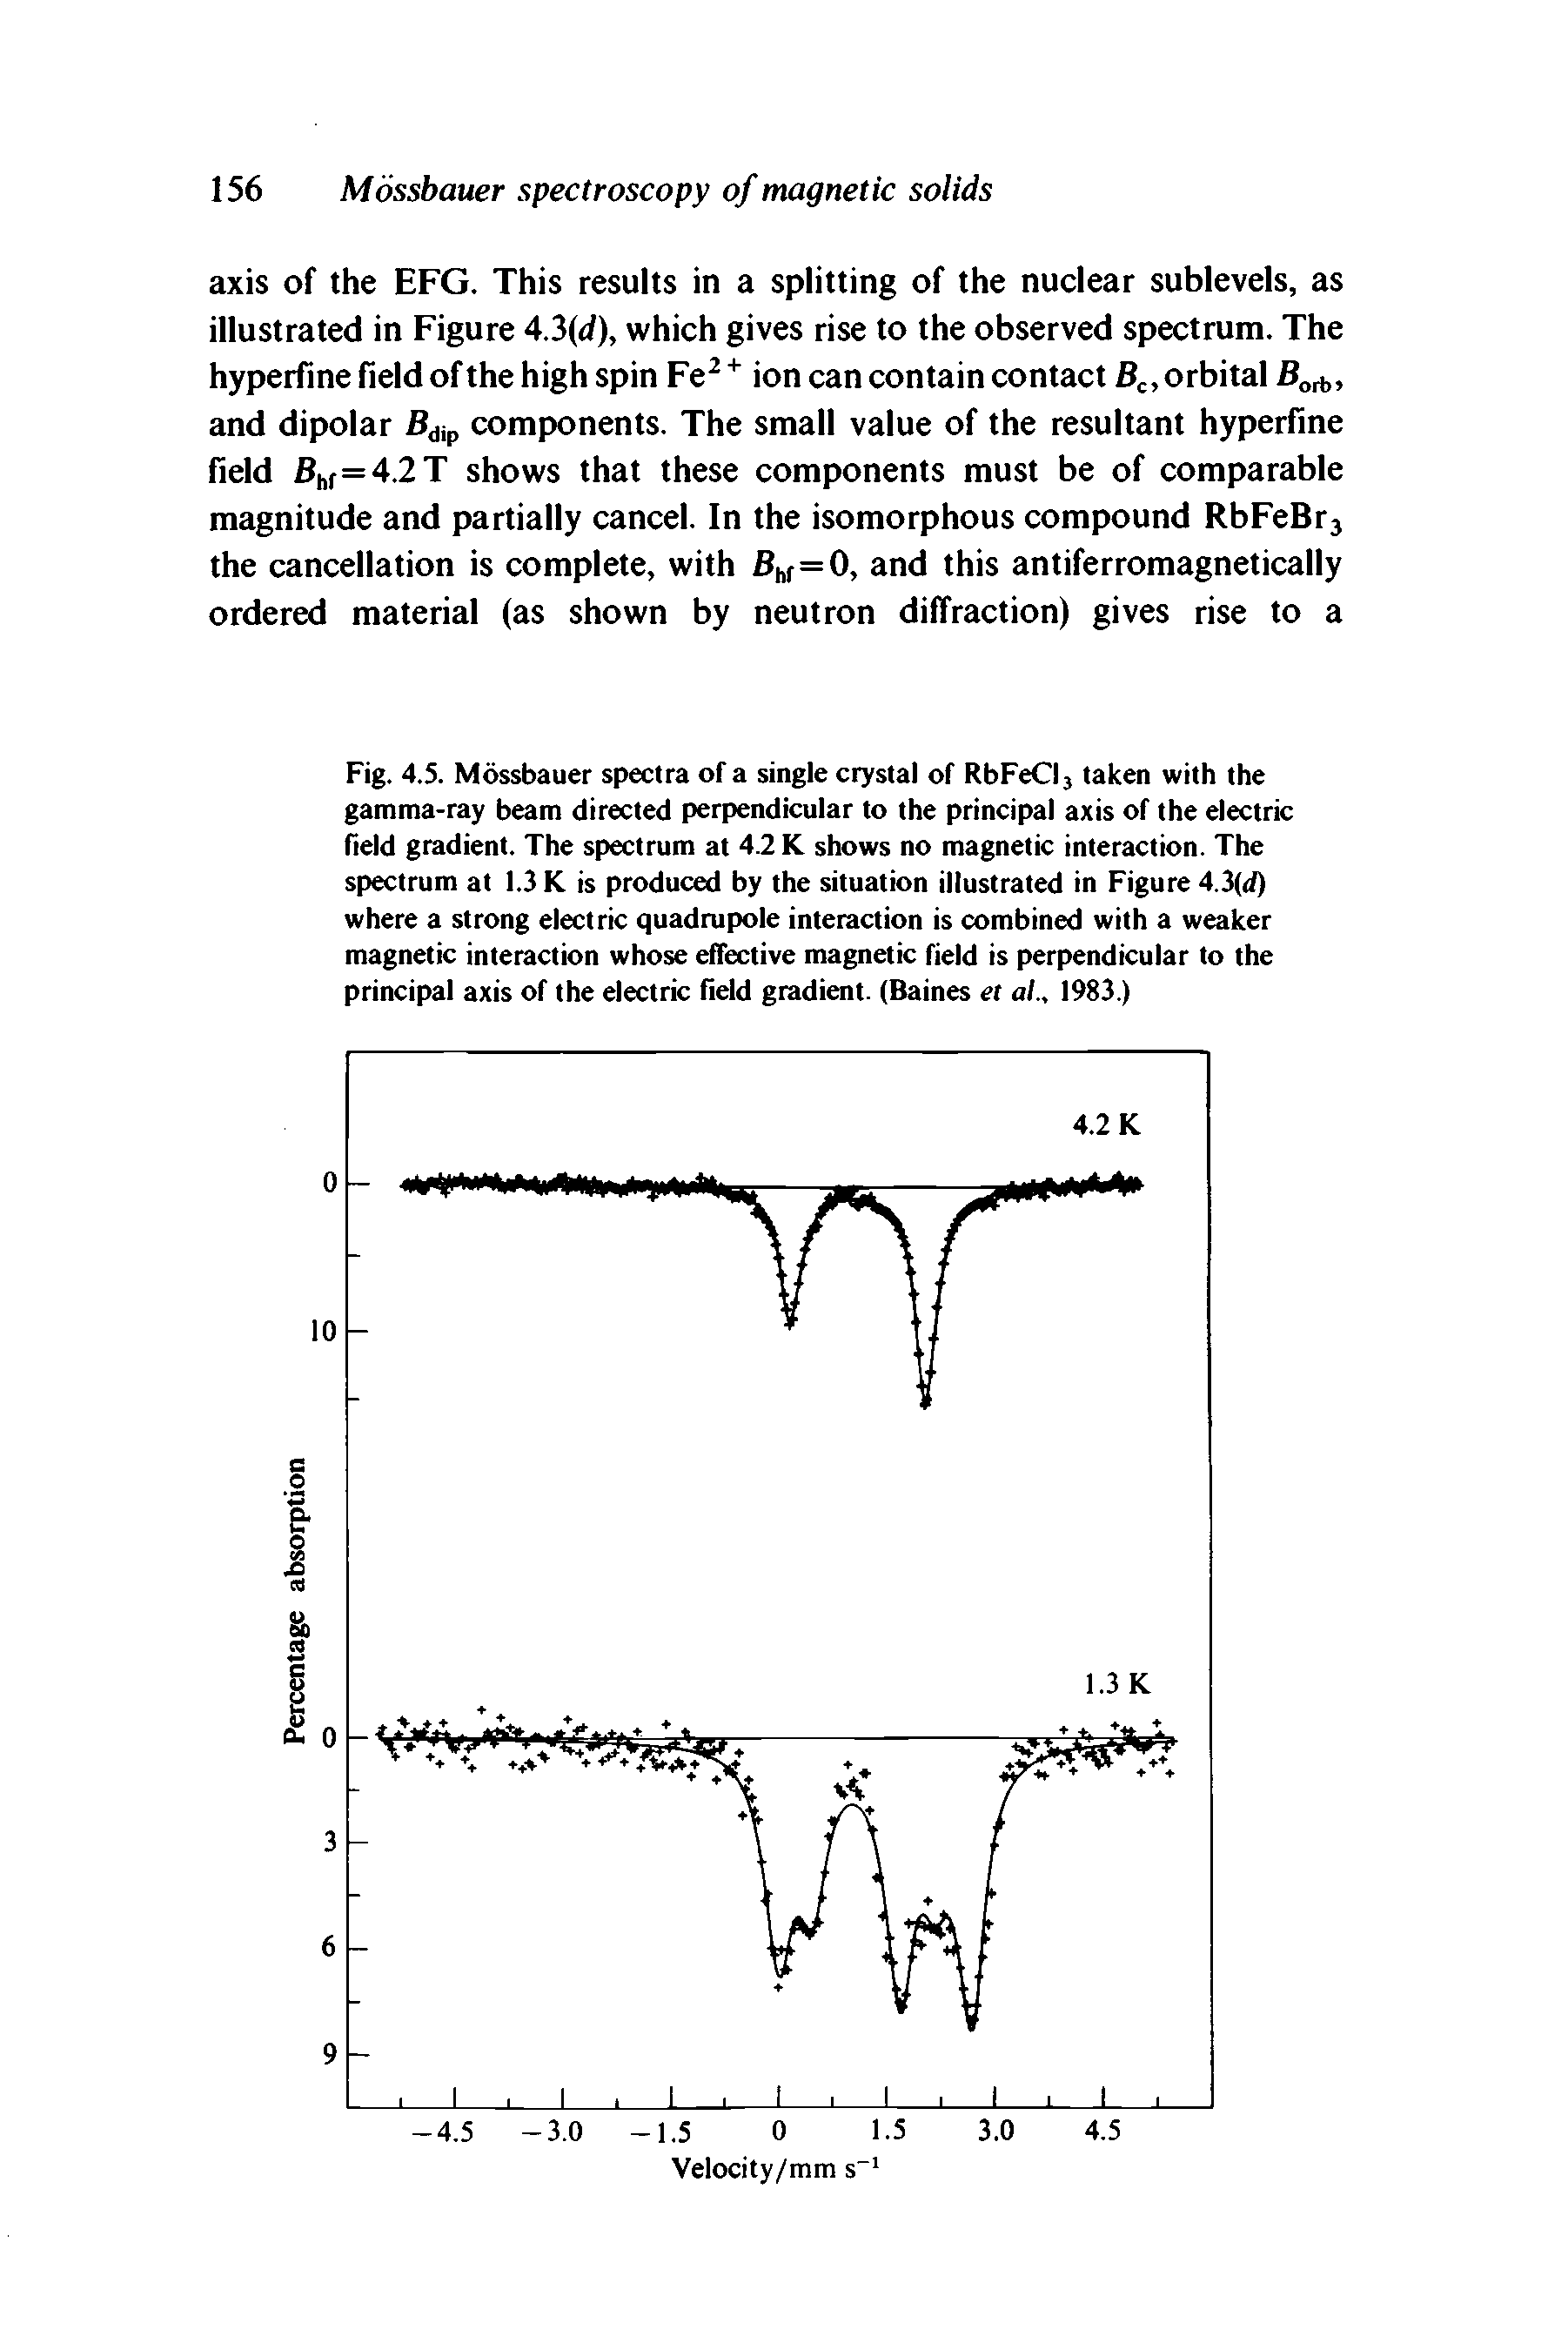 Fig. 4.5. Mossbauer spectra of a single crystal of RbFeCI, taken with the gamma-ray beam directed perpendicular to the principal axis of the electric field gradient. The spectrum at 4.2 K shows no magnetic interaction. The spectrum at 1.3 K is produced by the situation illustrated in Figure 4.3(d) where a strong electric quadrupole interaction is combined with a weaker magnetic interaction whose effective magnetic field is perpendicular to the principal axis of the electric field gradient. (Baines et al 1983.)...